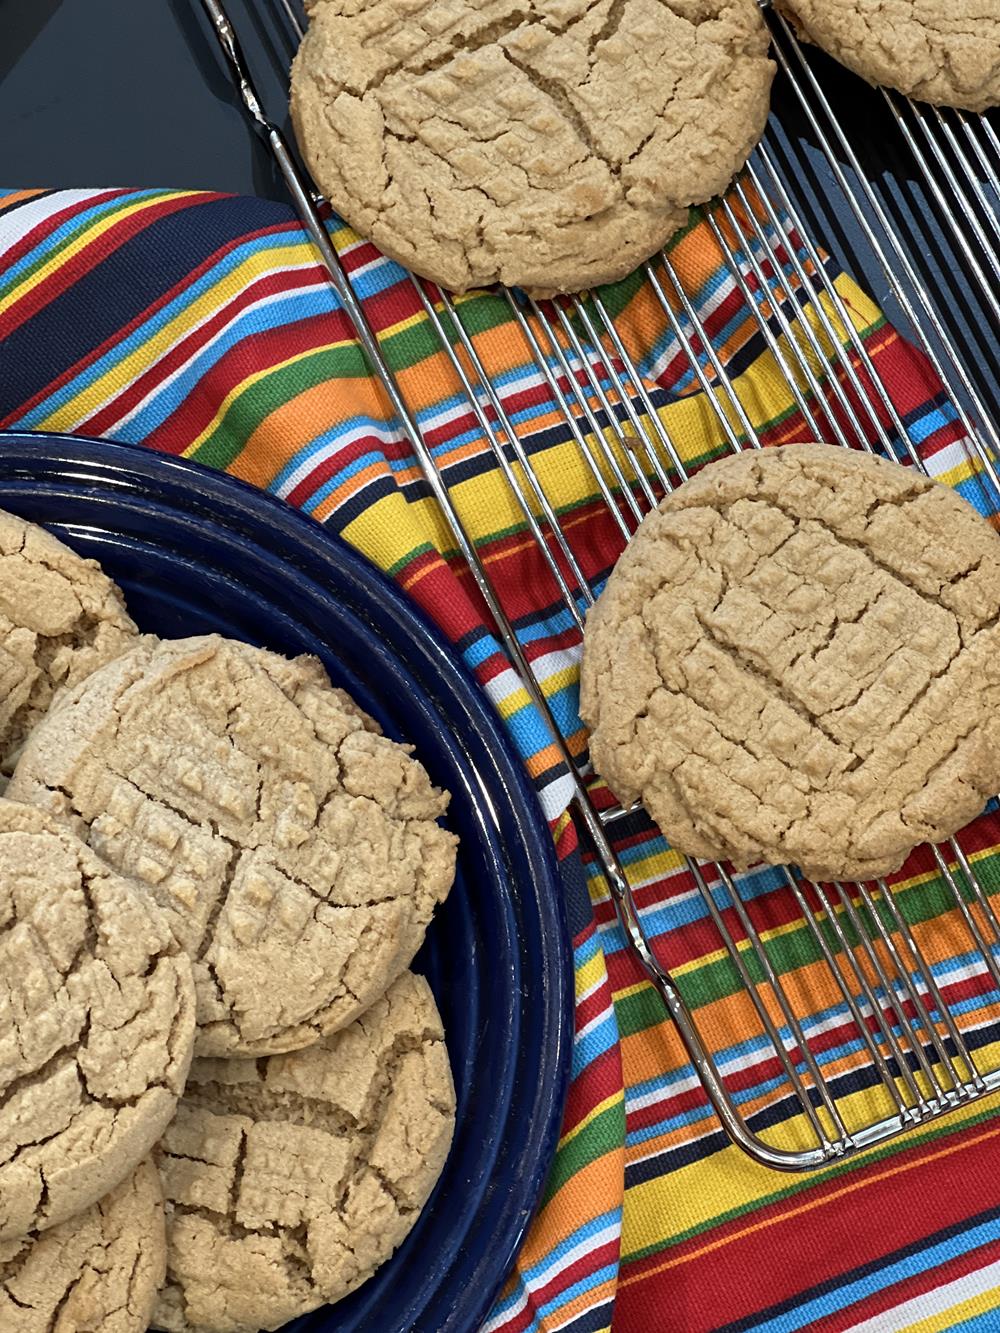 Peanut butter cookies on blue plate with striped napkin and cooling rack in back